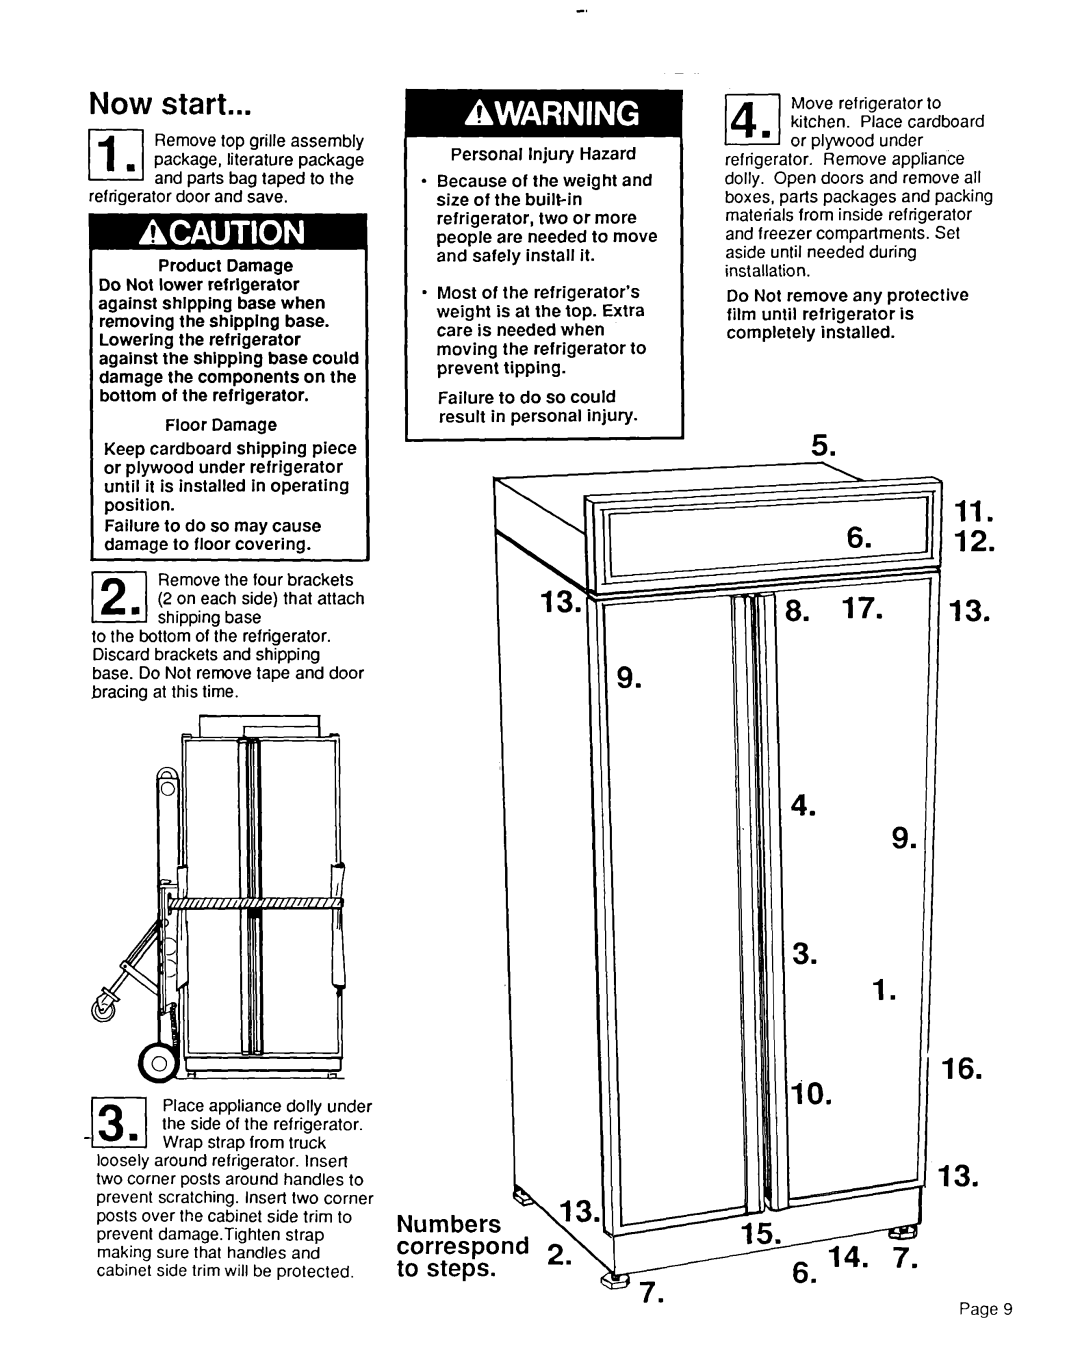 KitchenAid 2000495 installation instructions Now start, Place appliance doily under -El the side of the refrigerator 